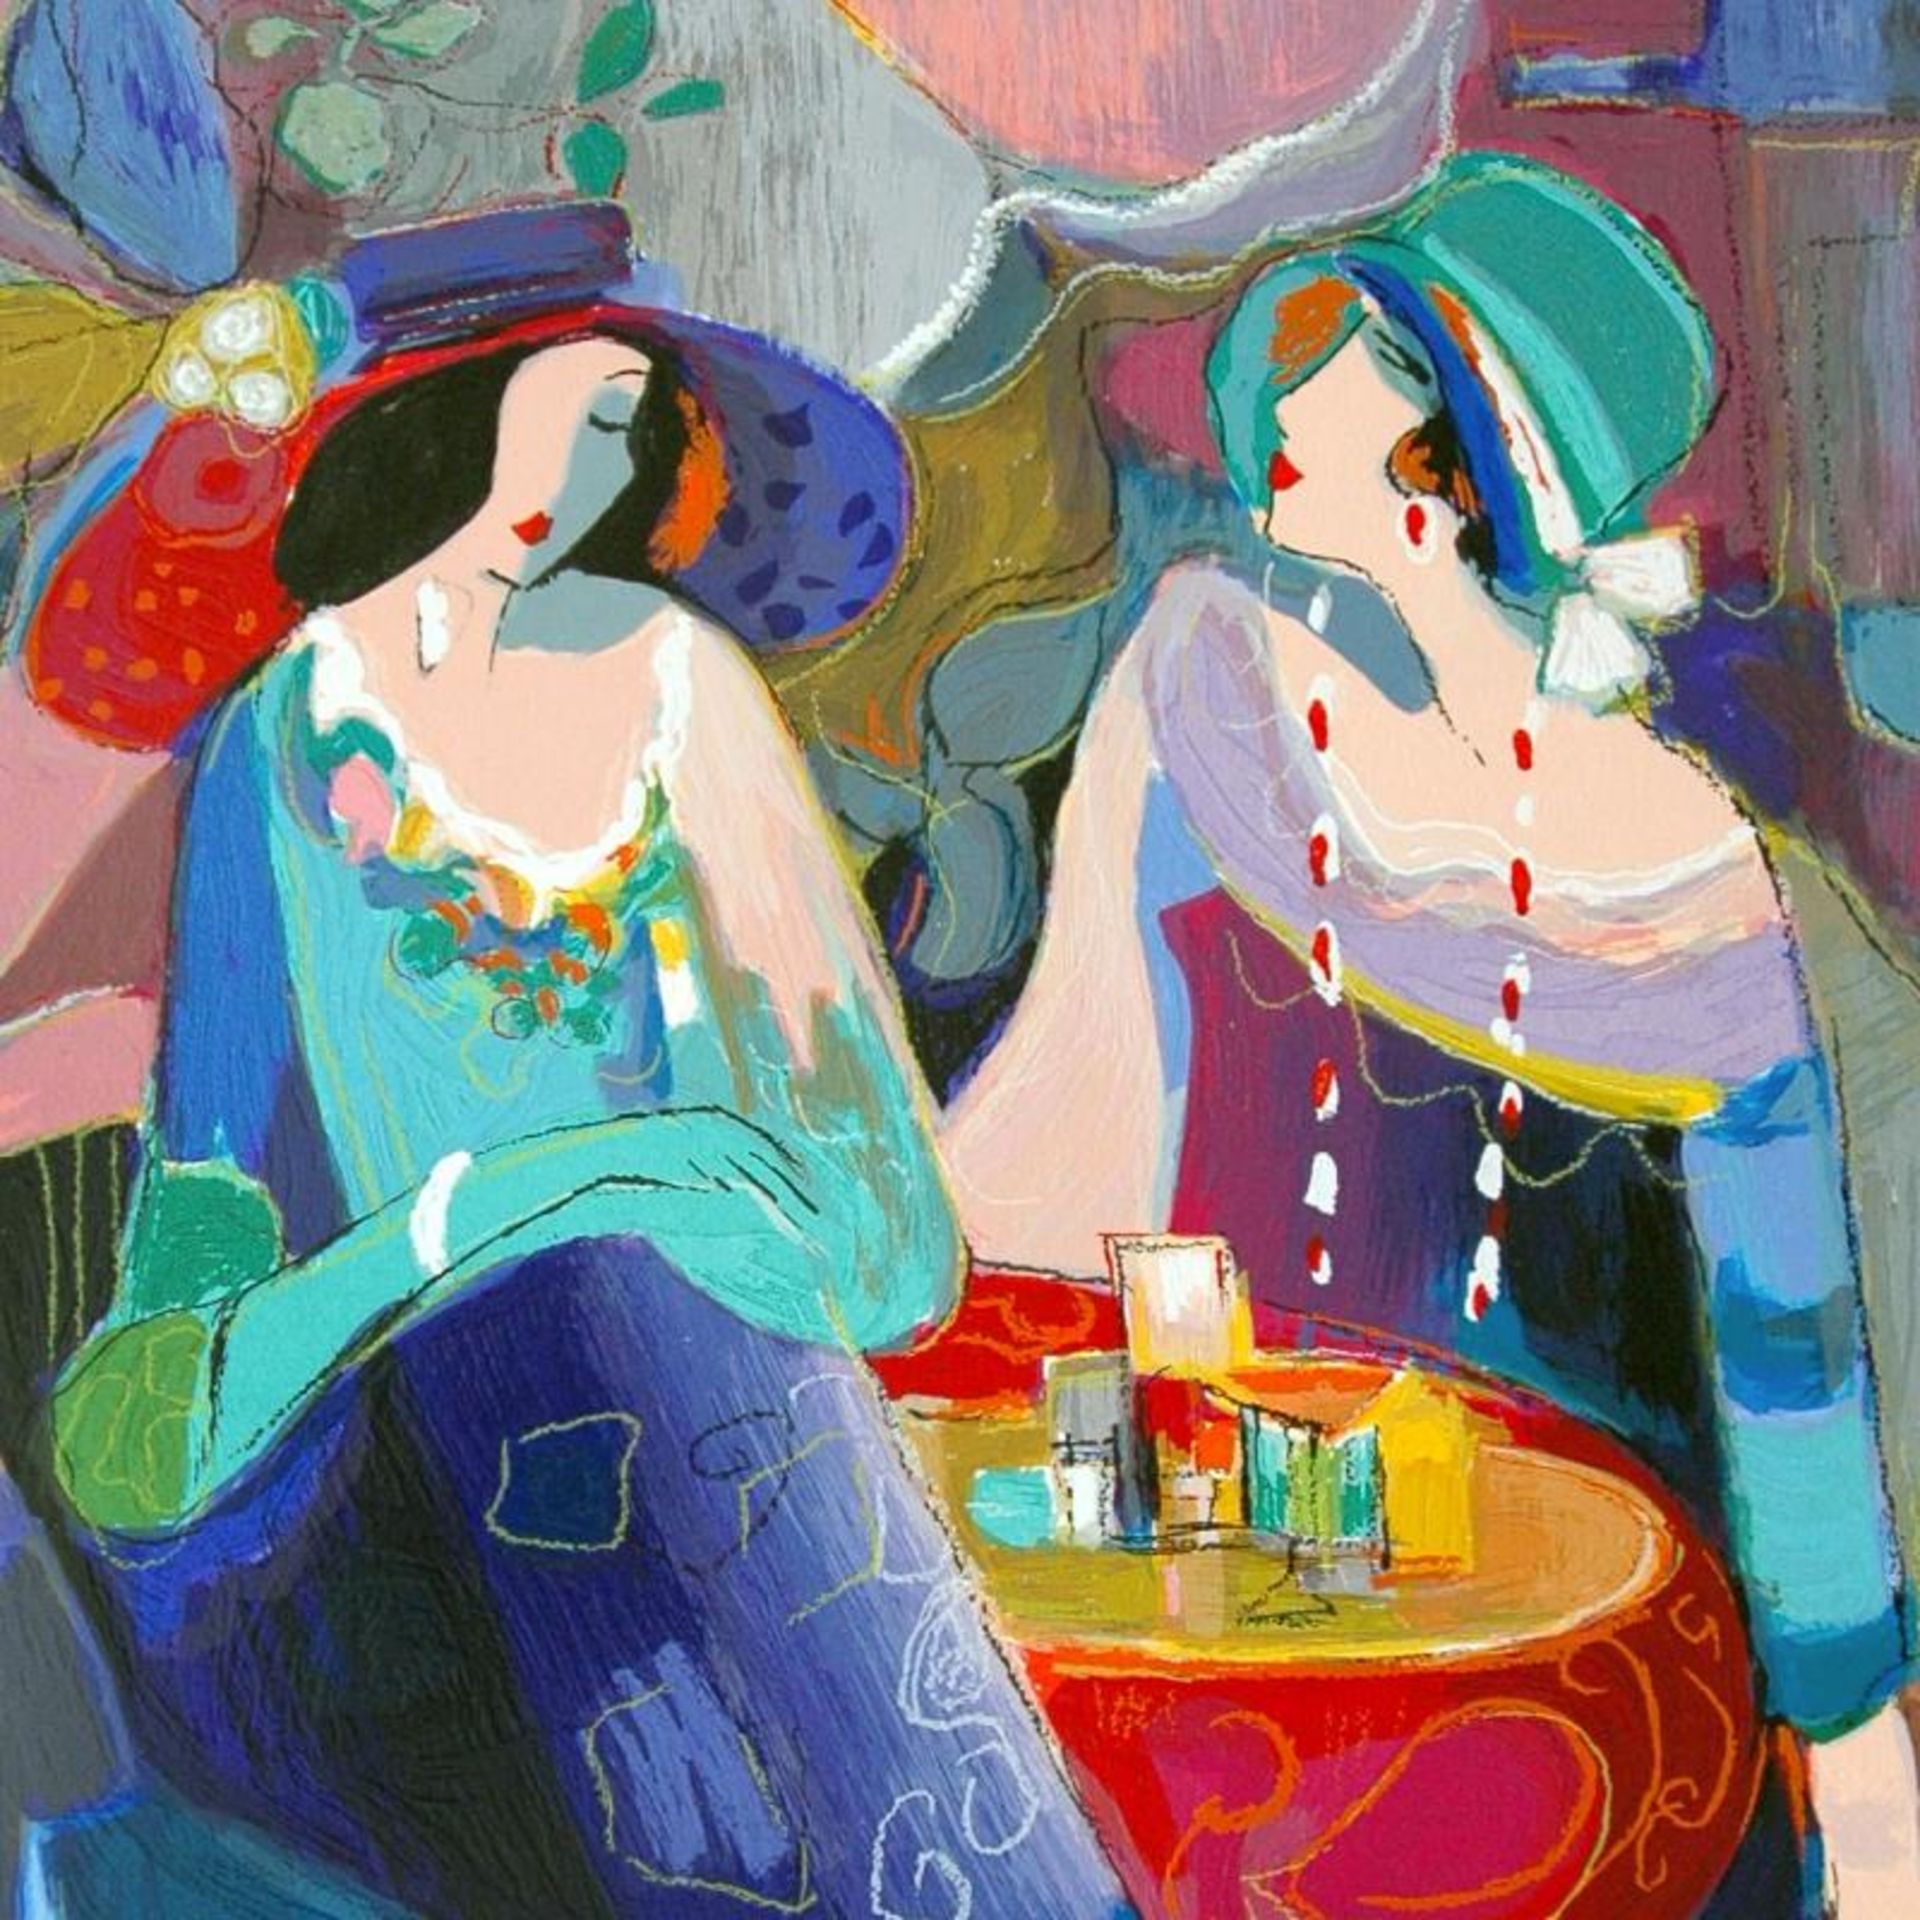 Pastel Gathering by Maimon, Isaac - Image 2 of 2